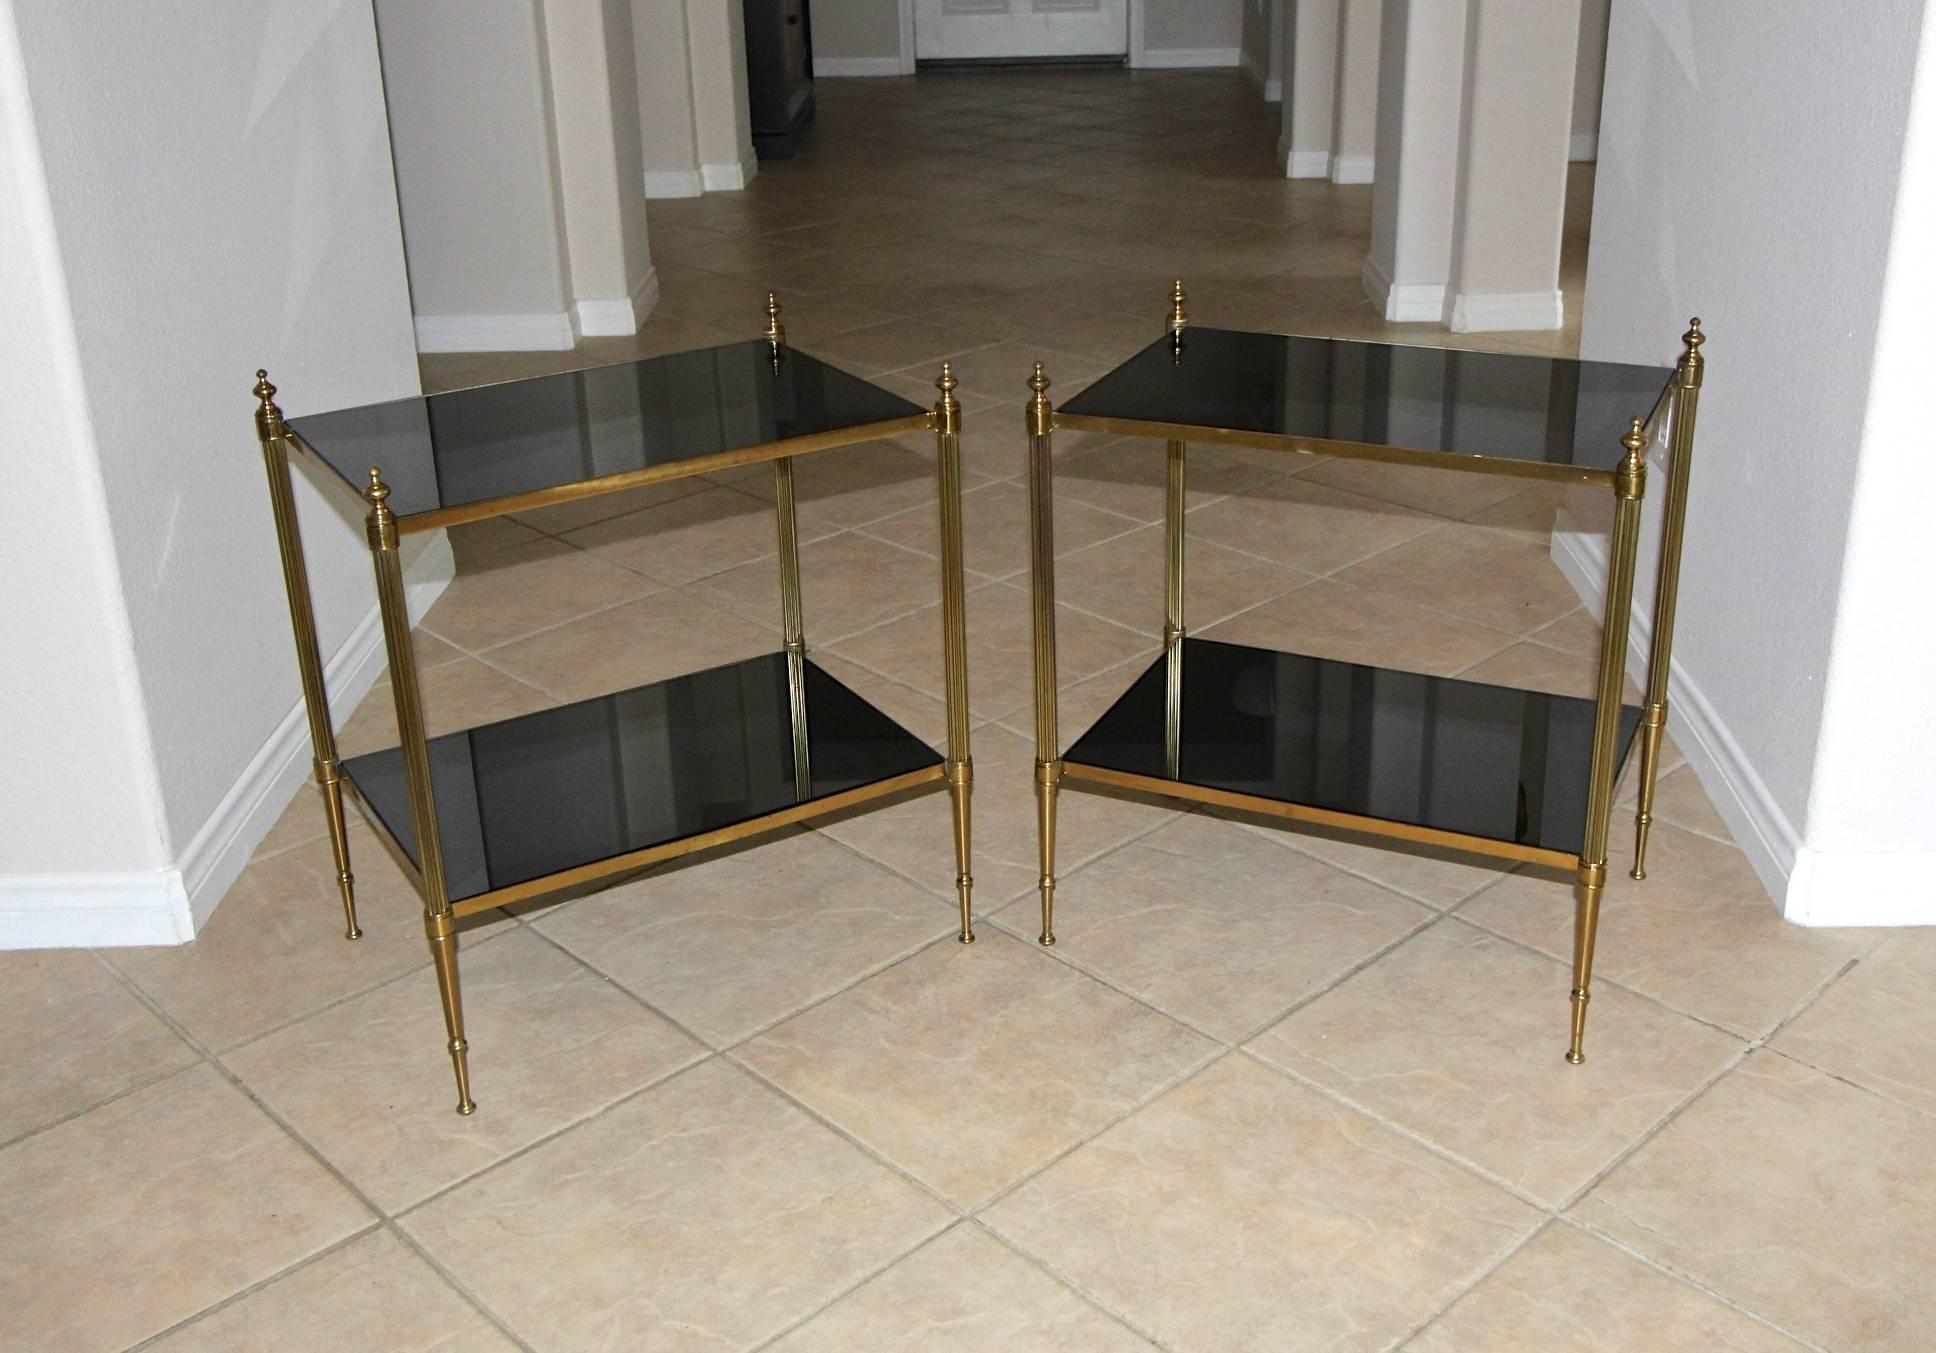 A pair of French two-tier brass side tables with newer dark graphite color mirrored inset tops.